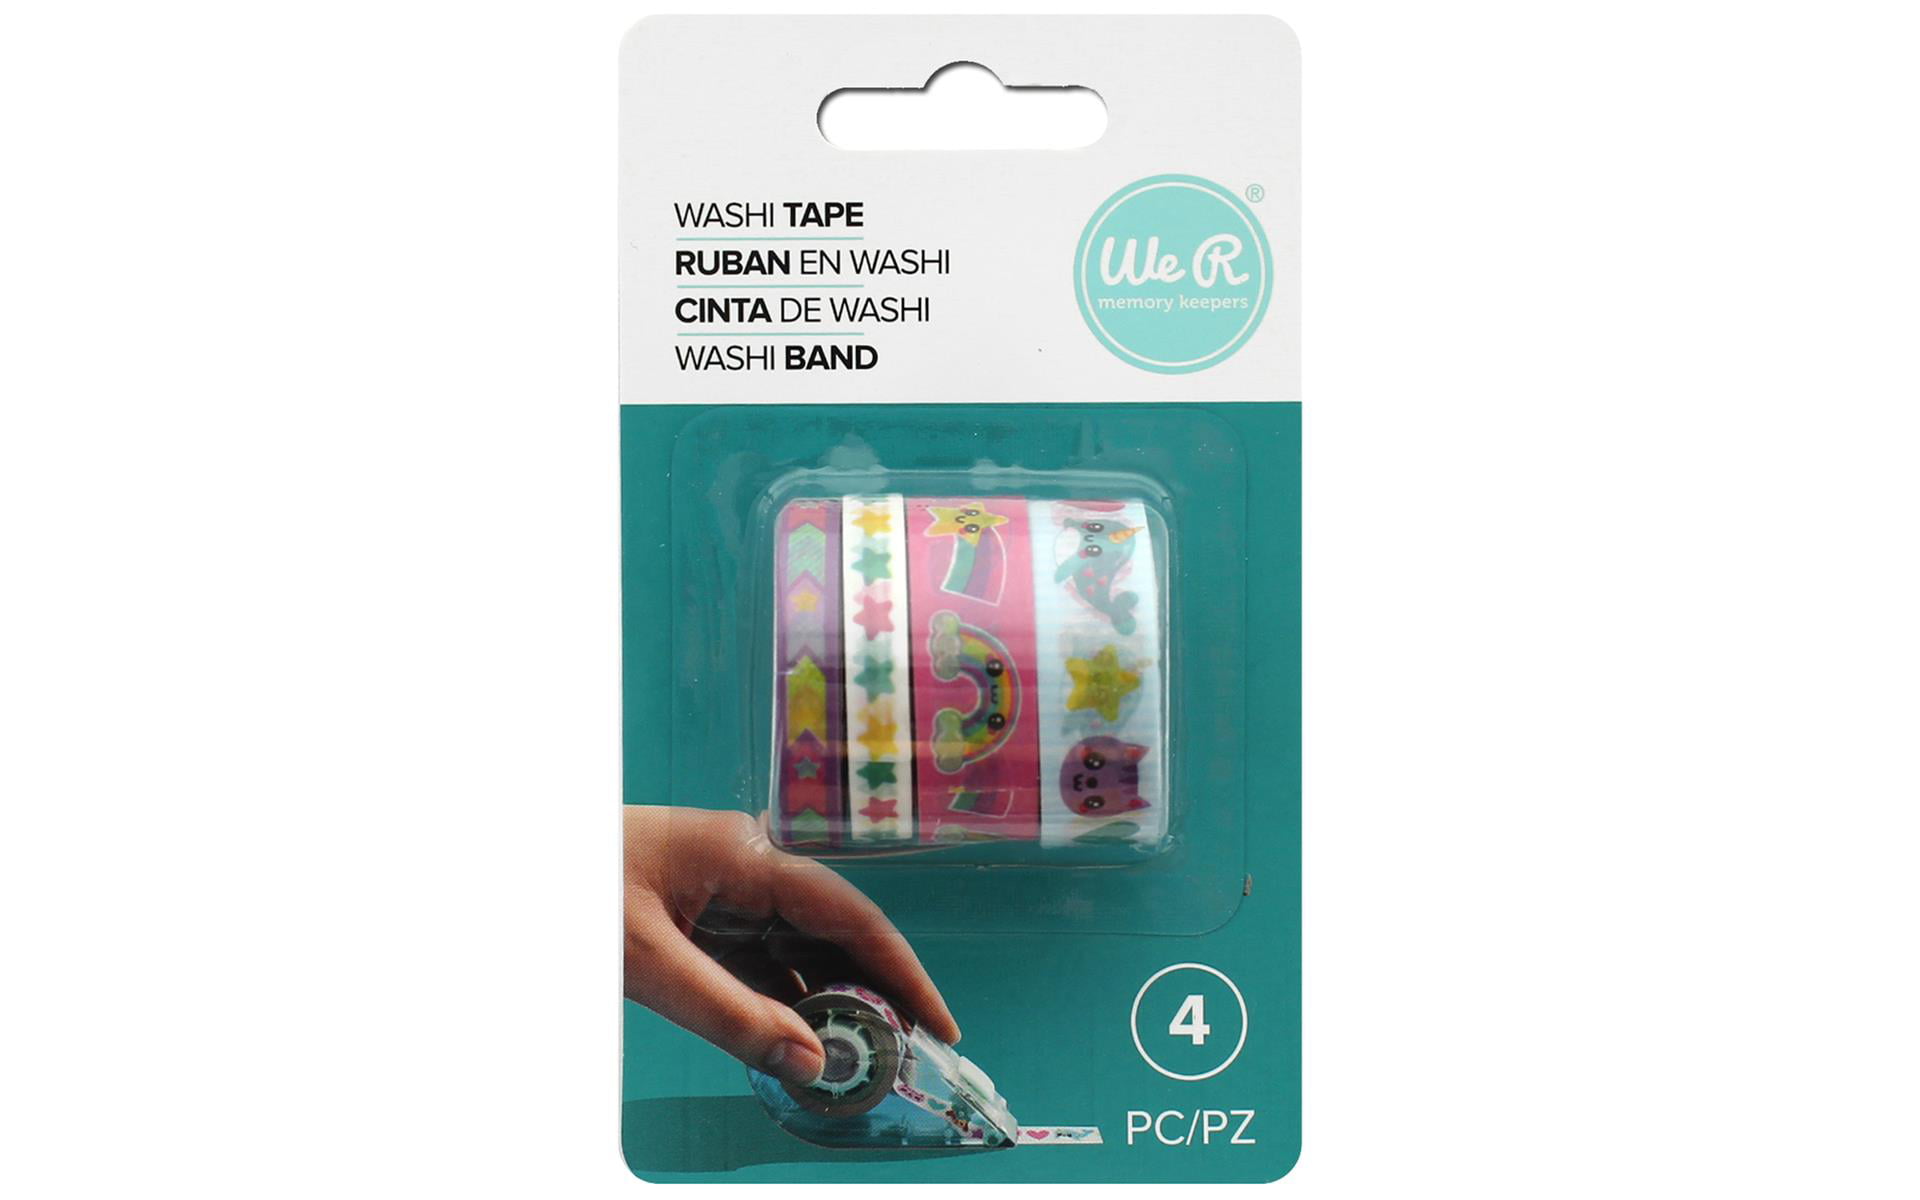 We R Memory Keepers Snap Washi Tape Kit 